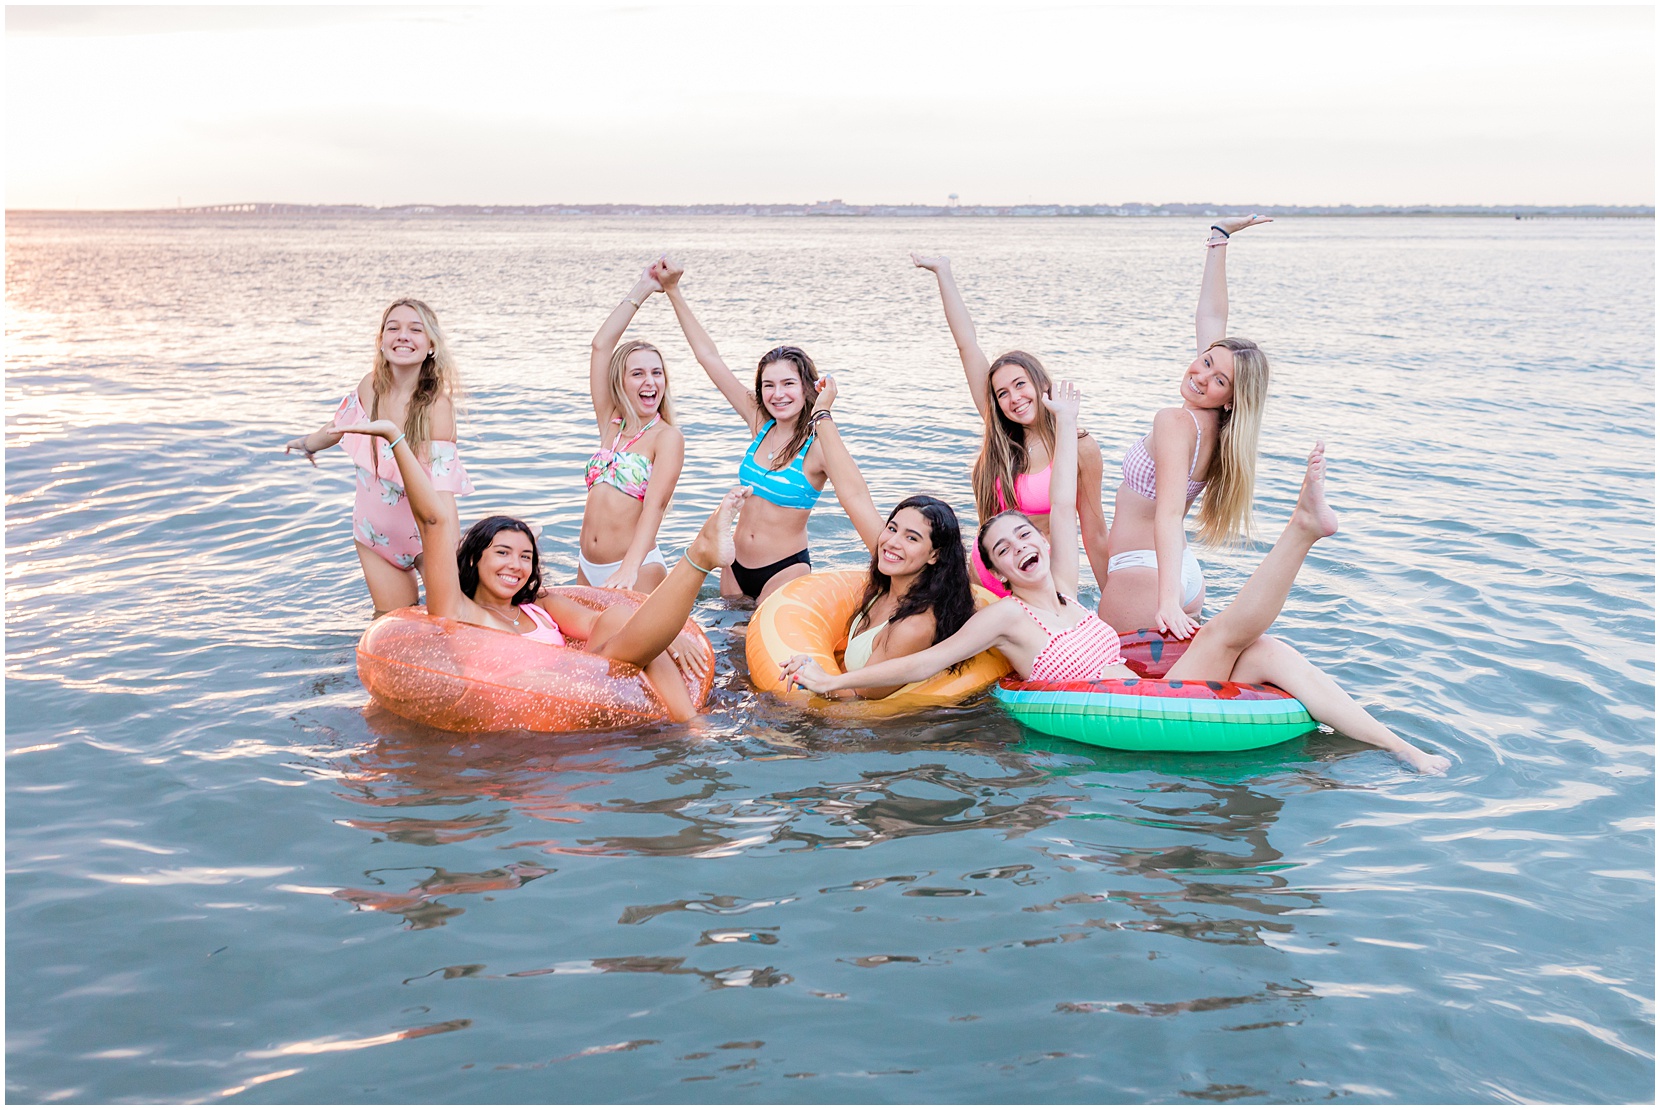 Nicole Marie Photography's senior model team on the bay with fruit floats